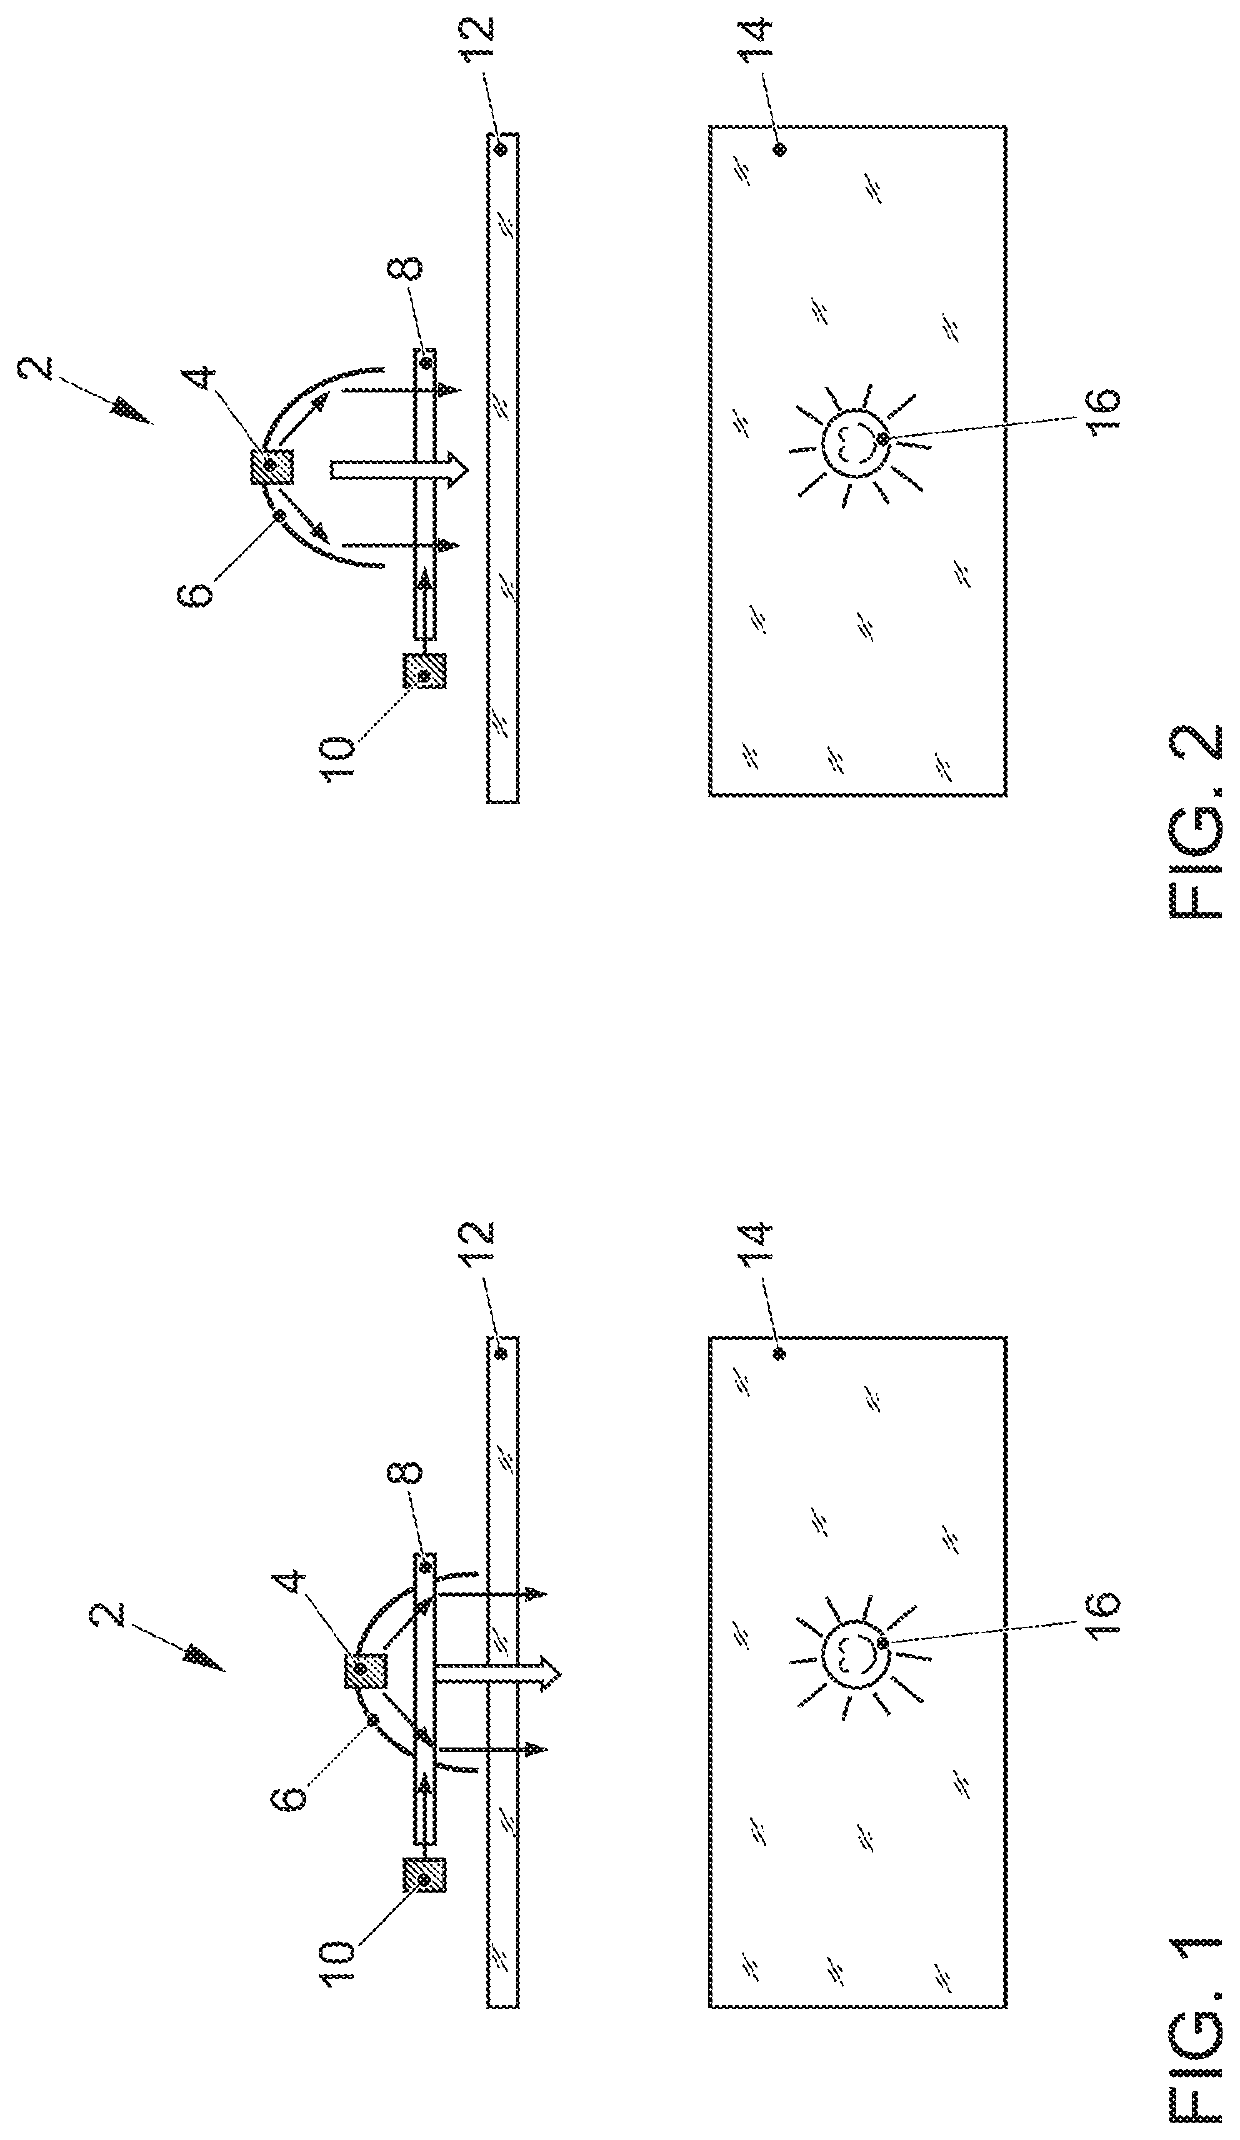 Lighting device for illuminating a passenger compartment of a vehicle